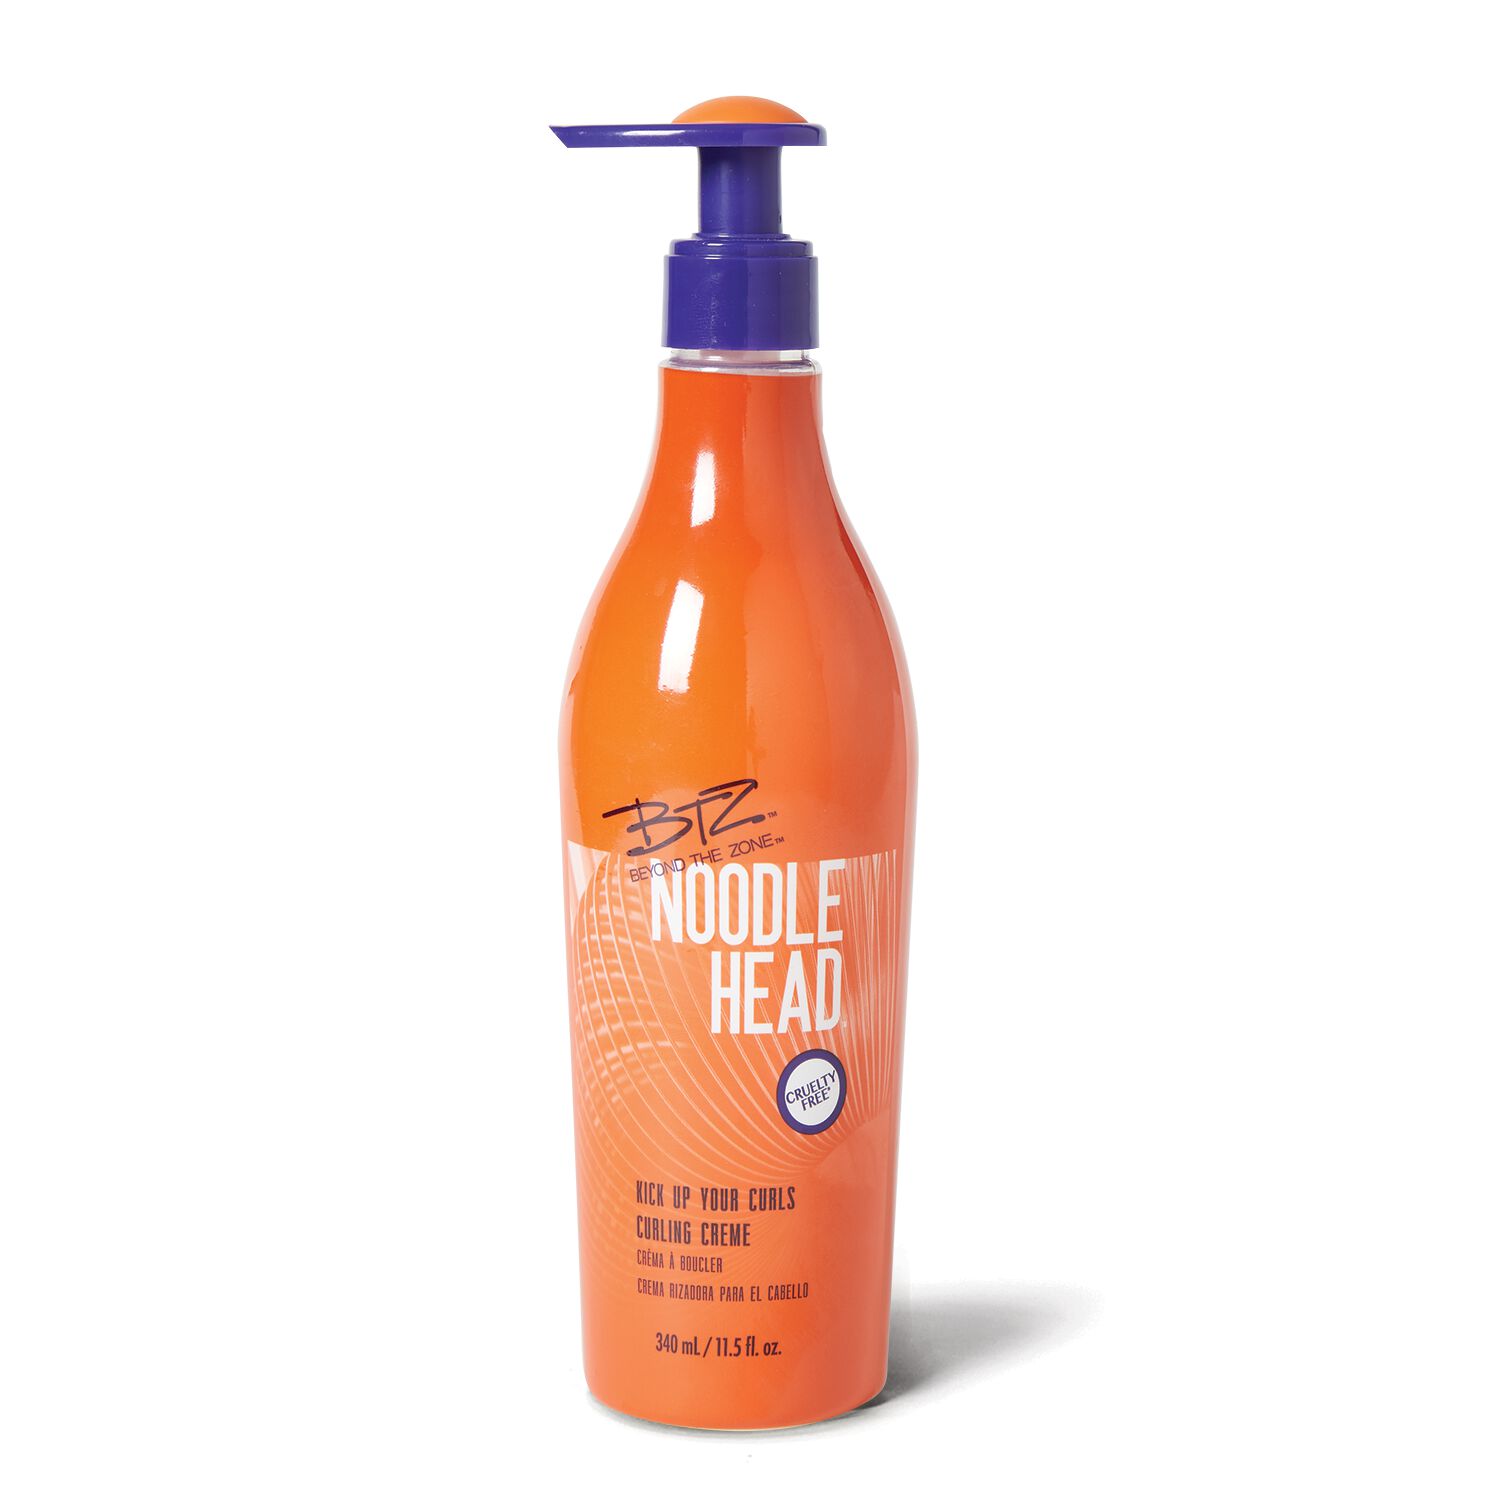 Beyond The Zone Noodle Head Kick Up Your Curls Curling Creme